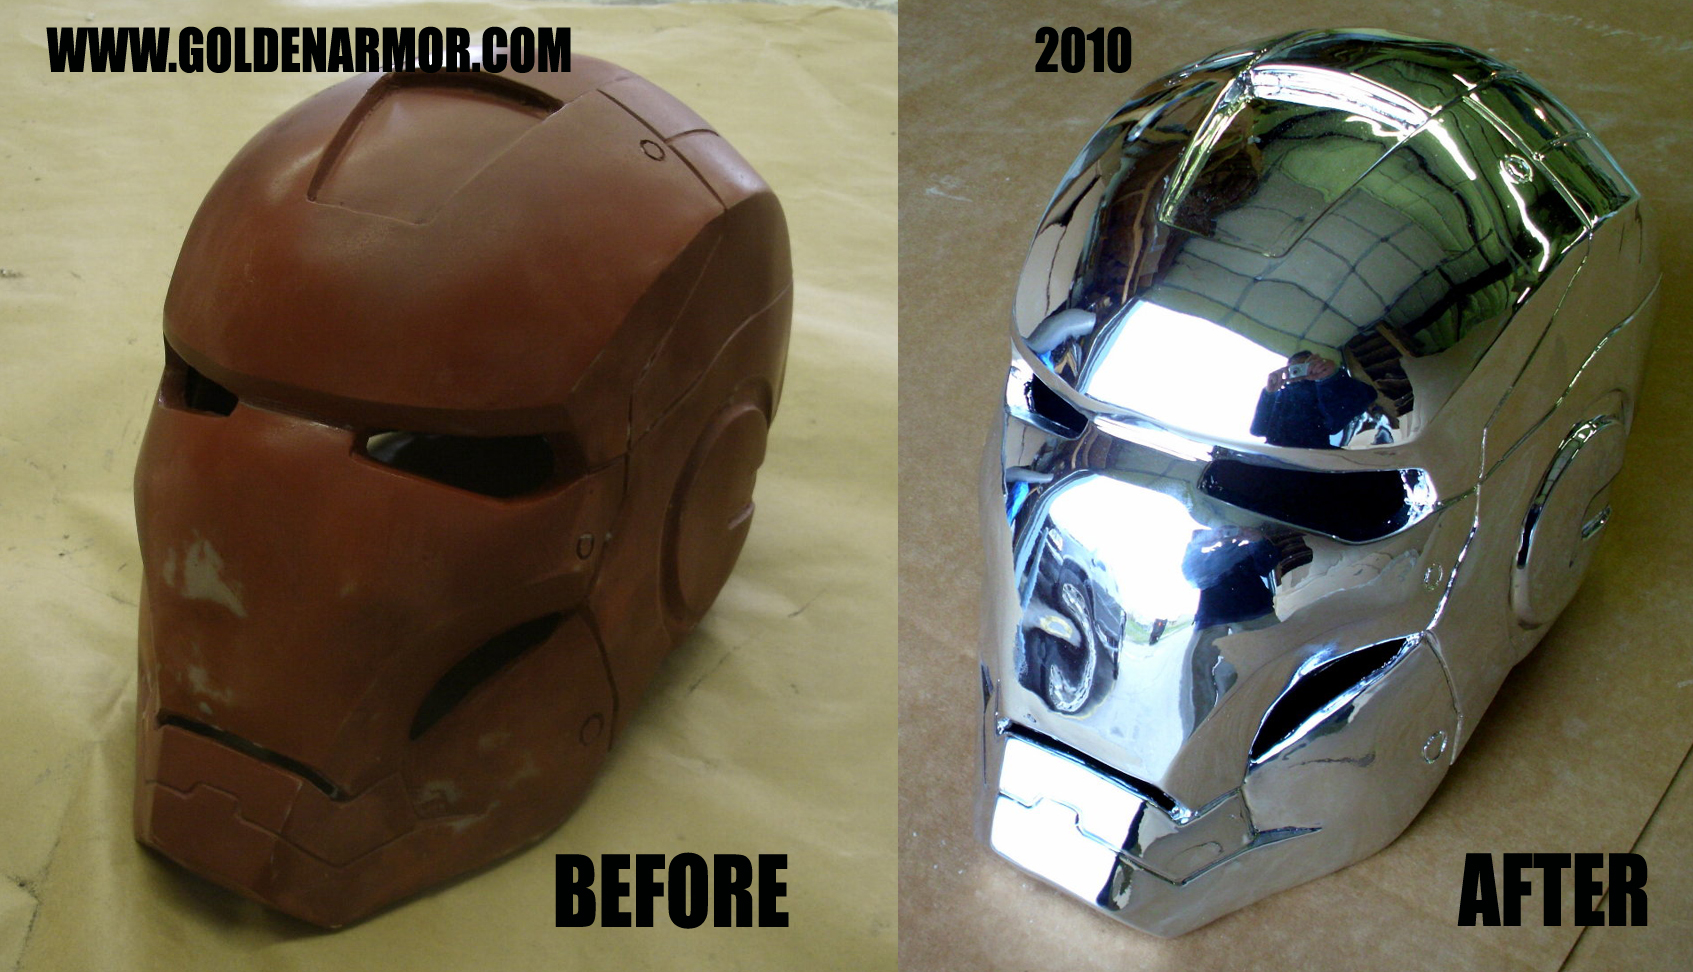 CHROME PLATING SERVICES - Prop Replicas, Custom Fabrication, SPECIAL EFFECTS